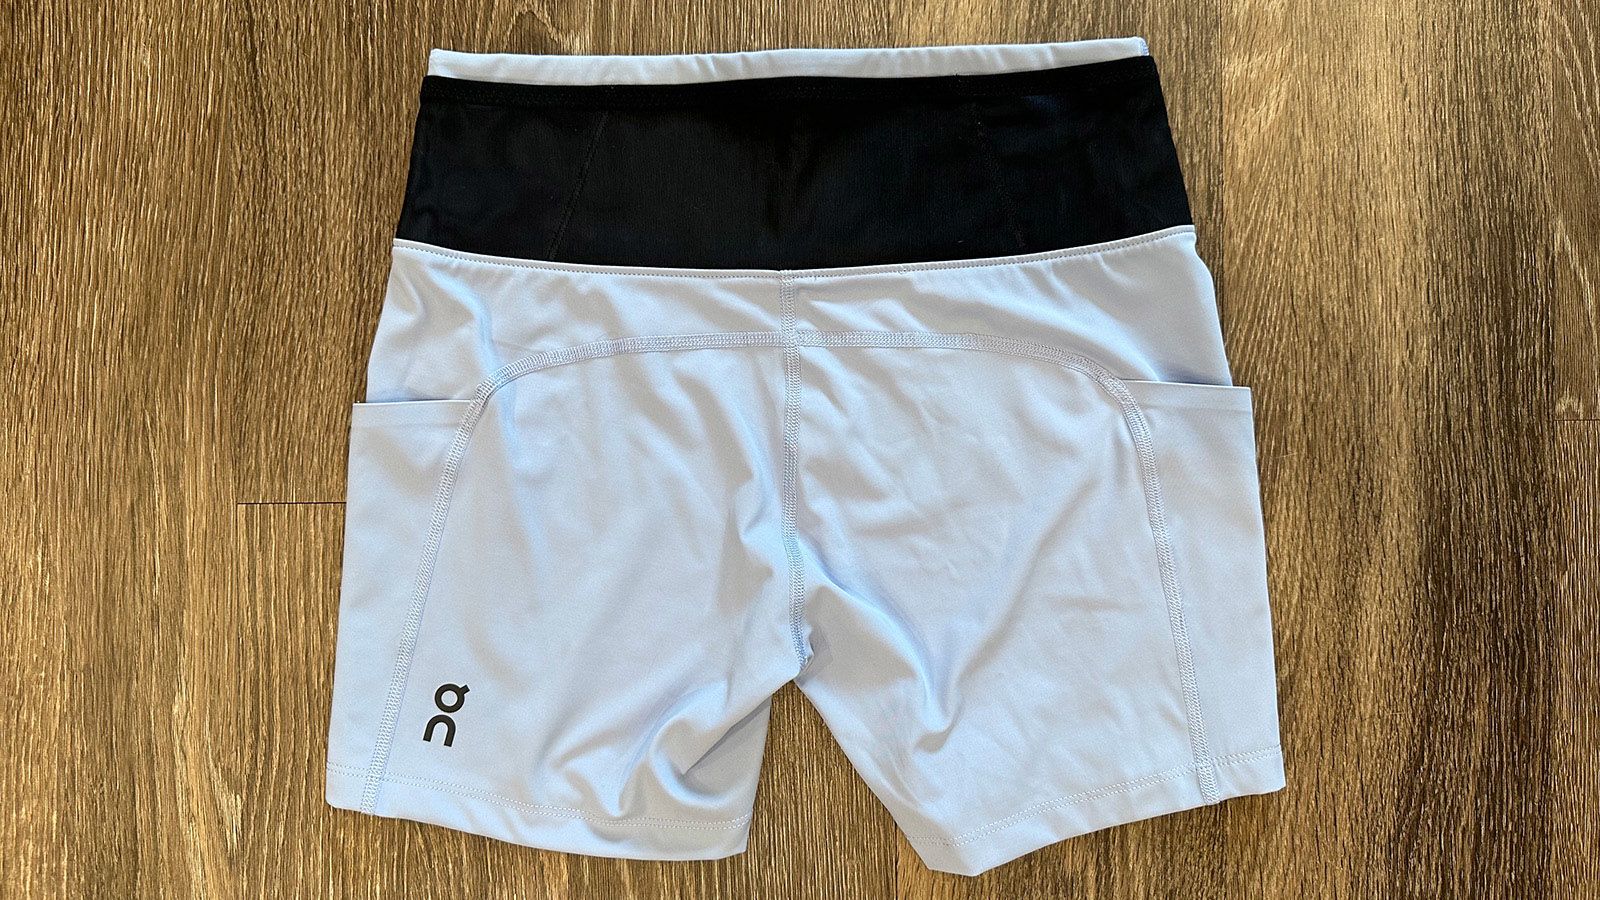 How I Finally Fell in Love with Tight Running Shorts - Women's Running